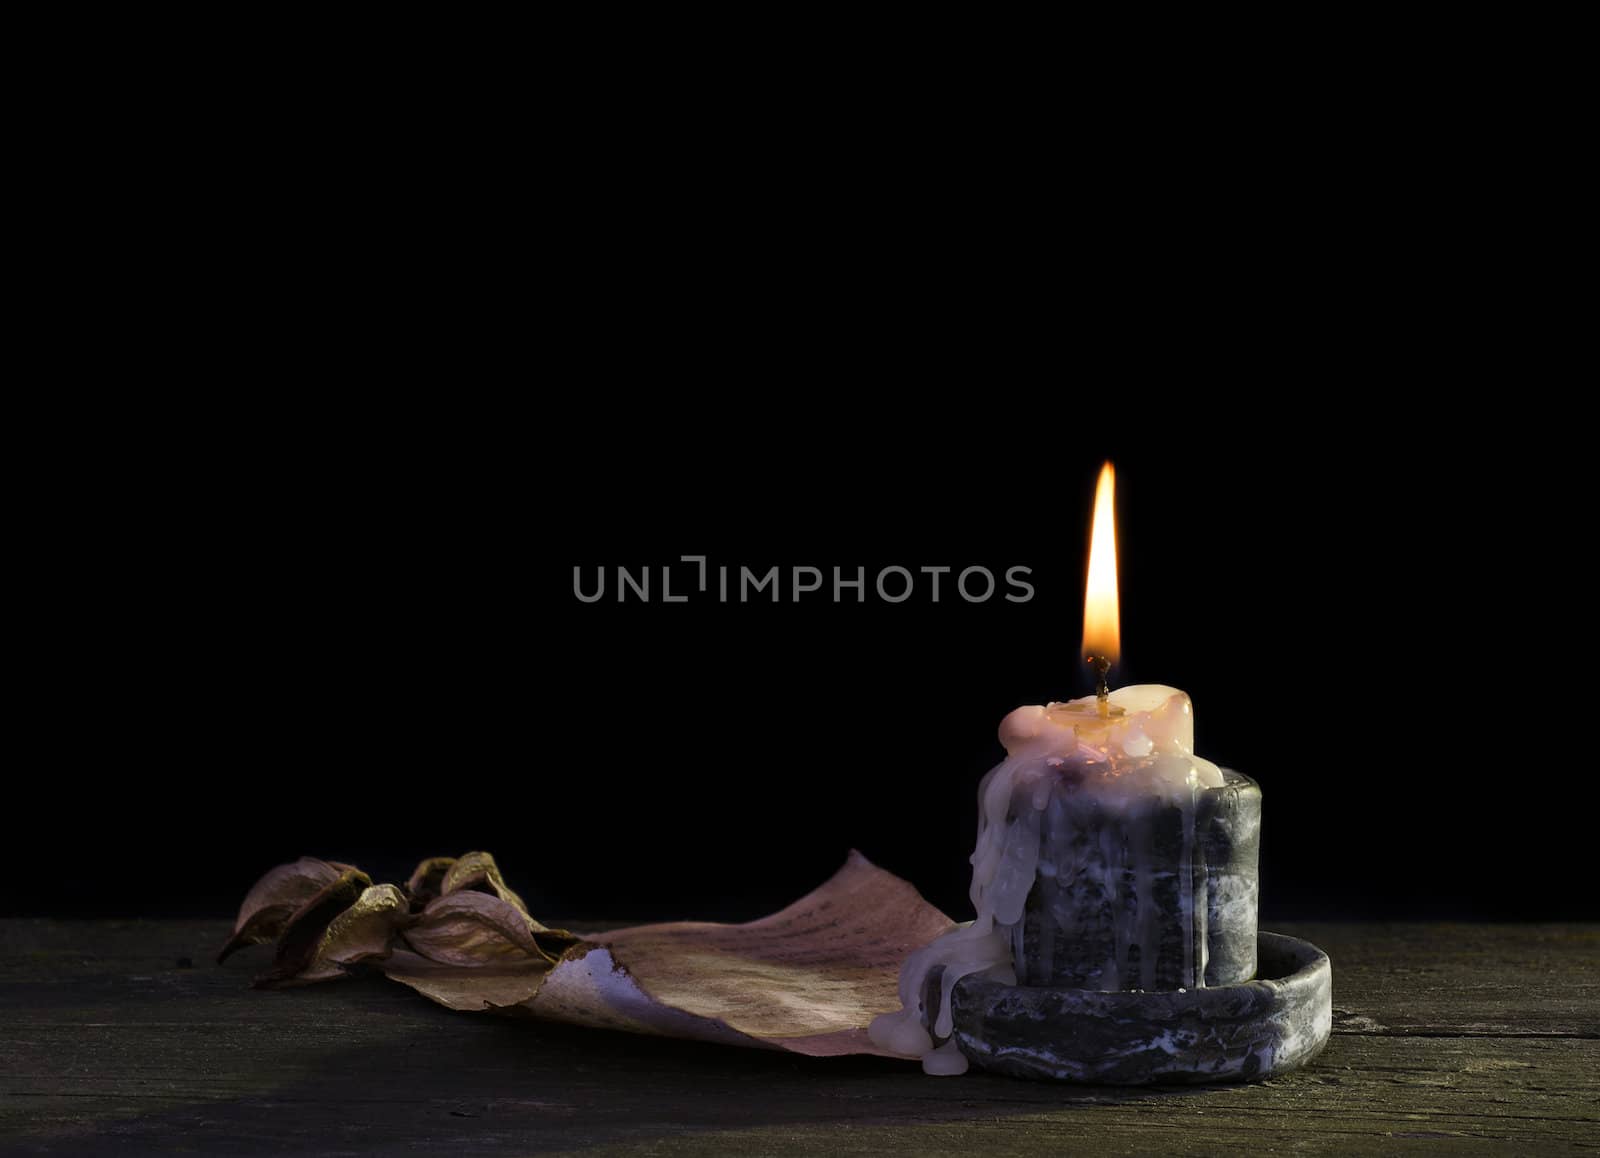 Light a candle by JazzManZZ